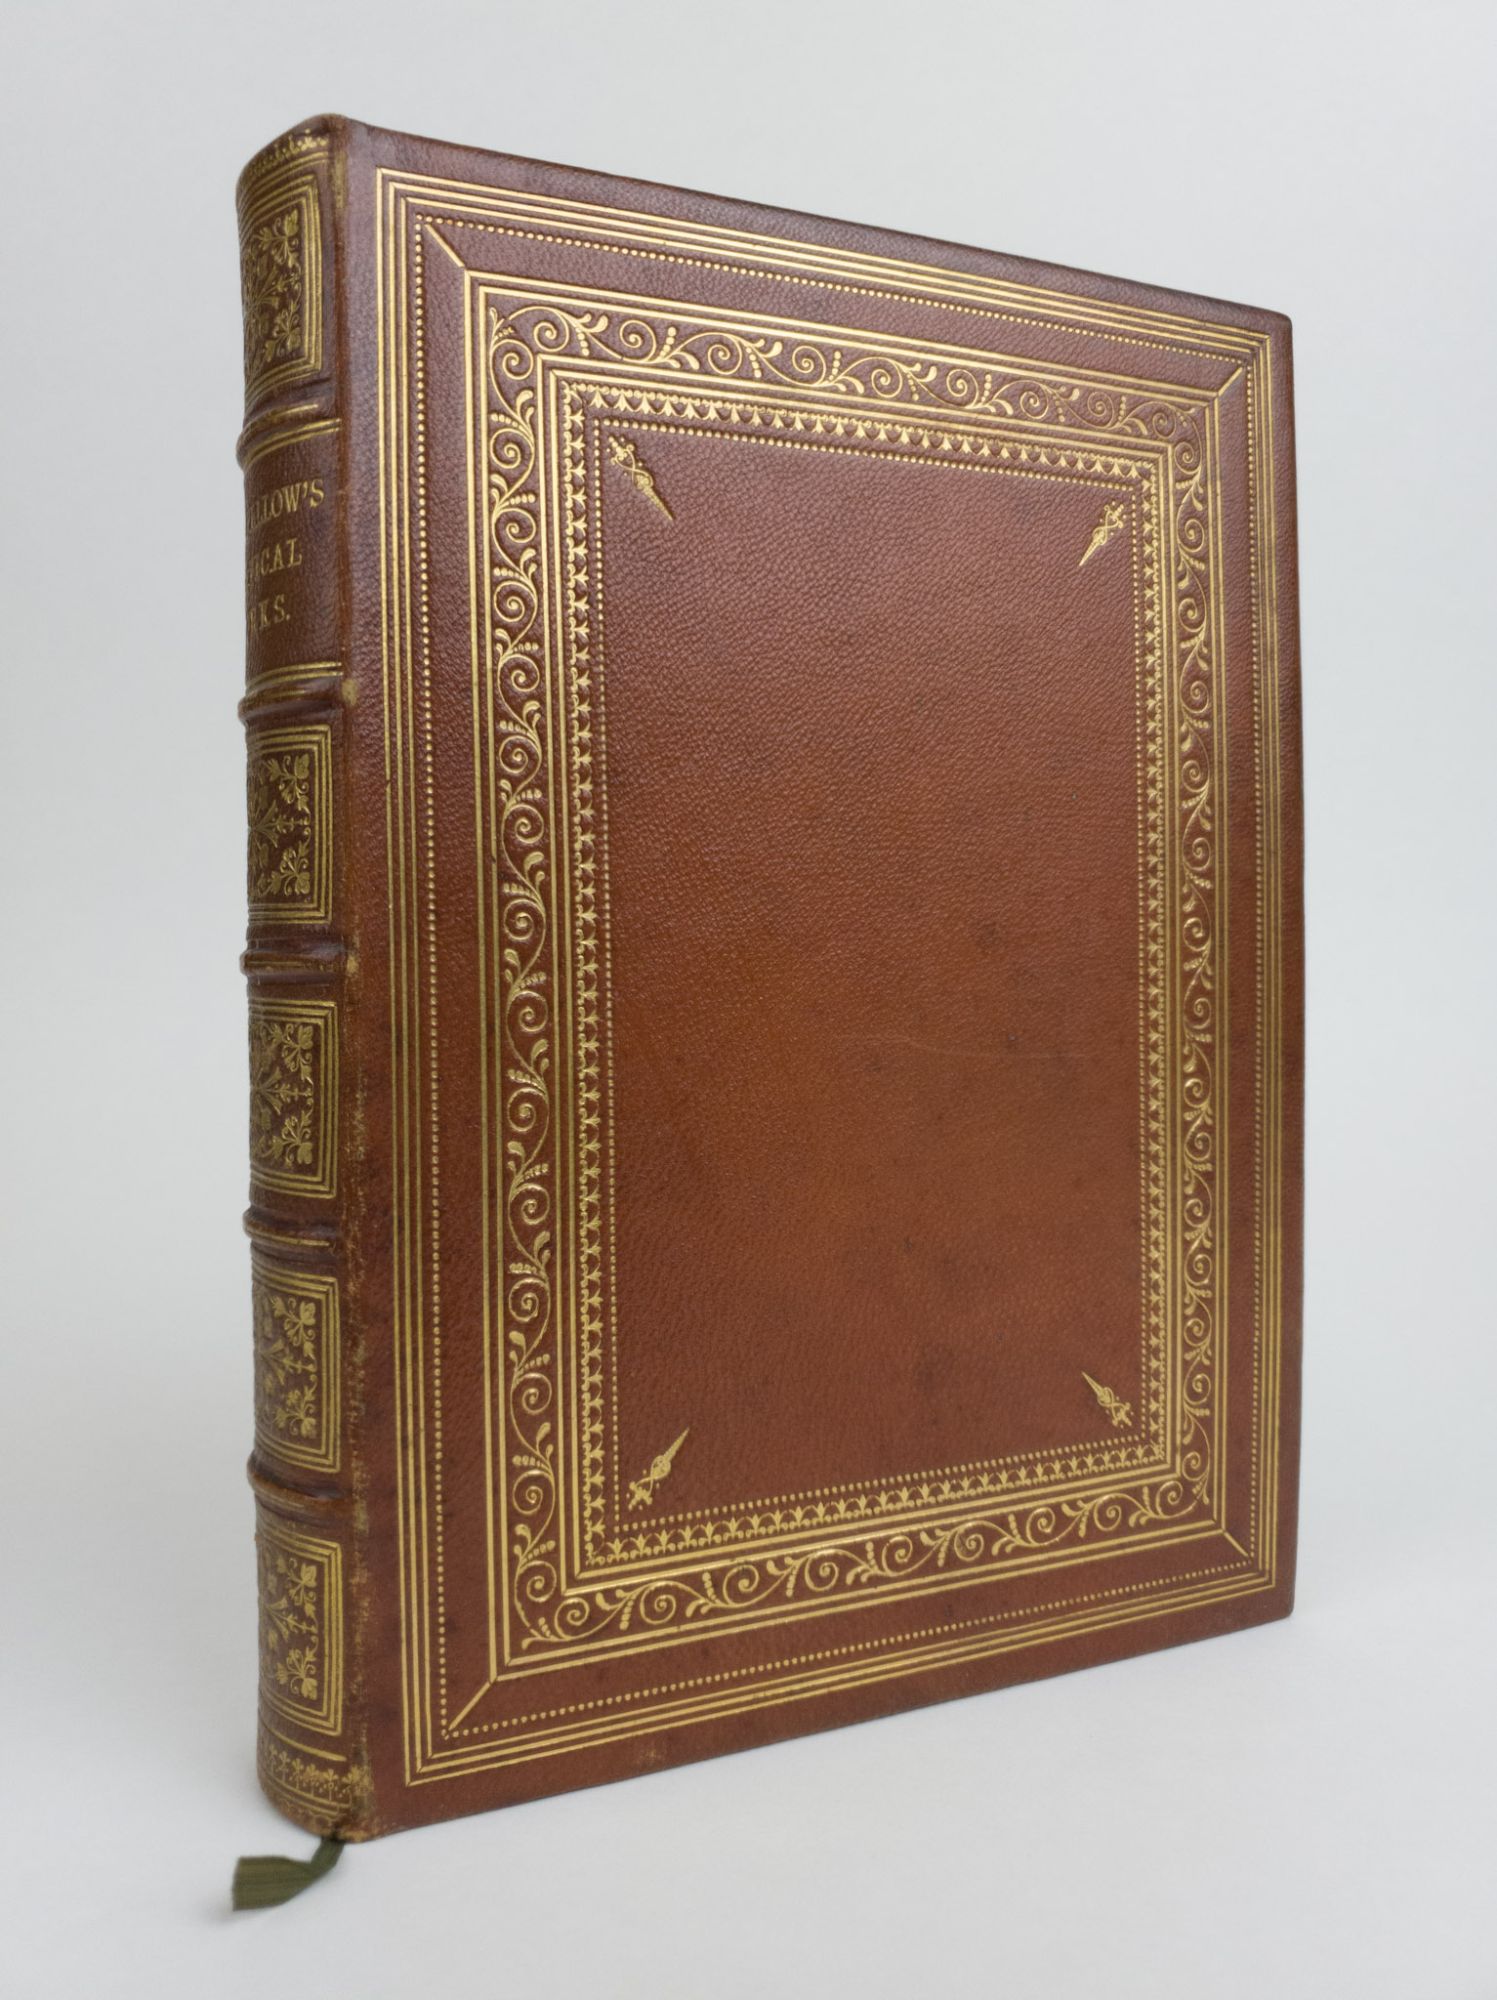 Product Image for THE POETICAL WORKS OF HENRY WADSWORTH LONGFELLOW